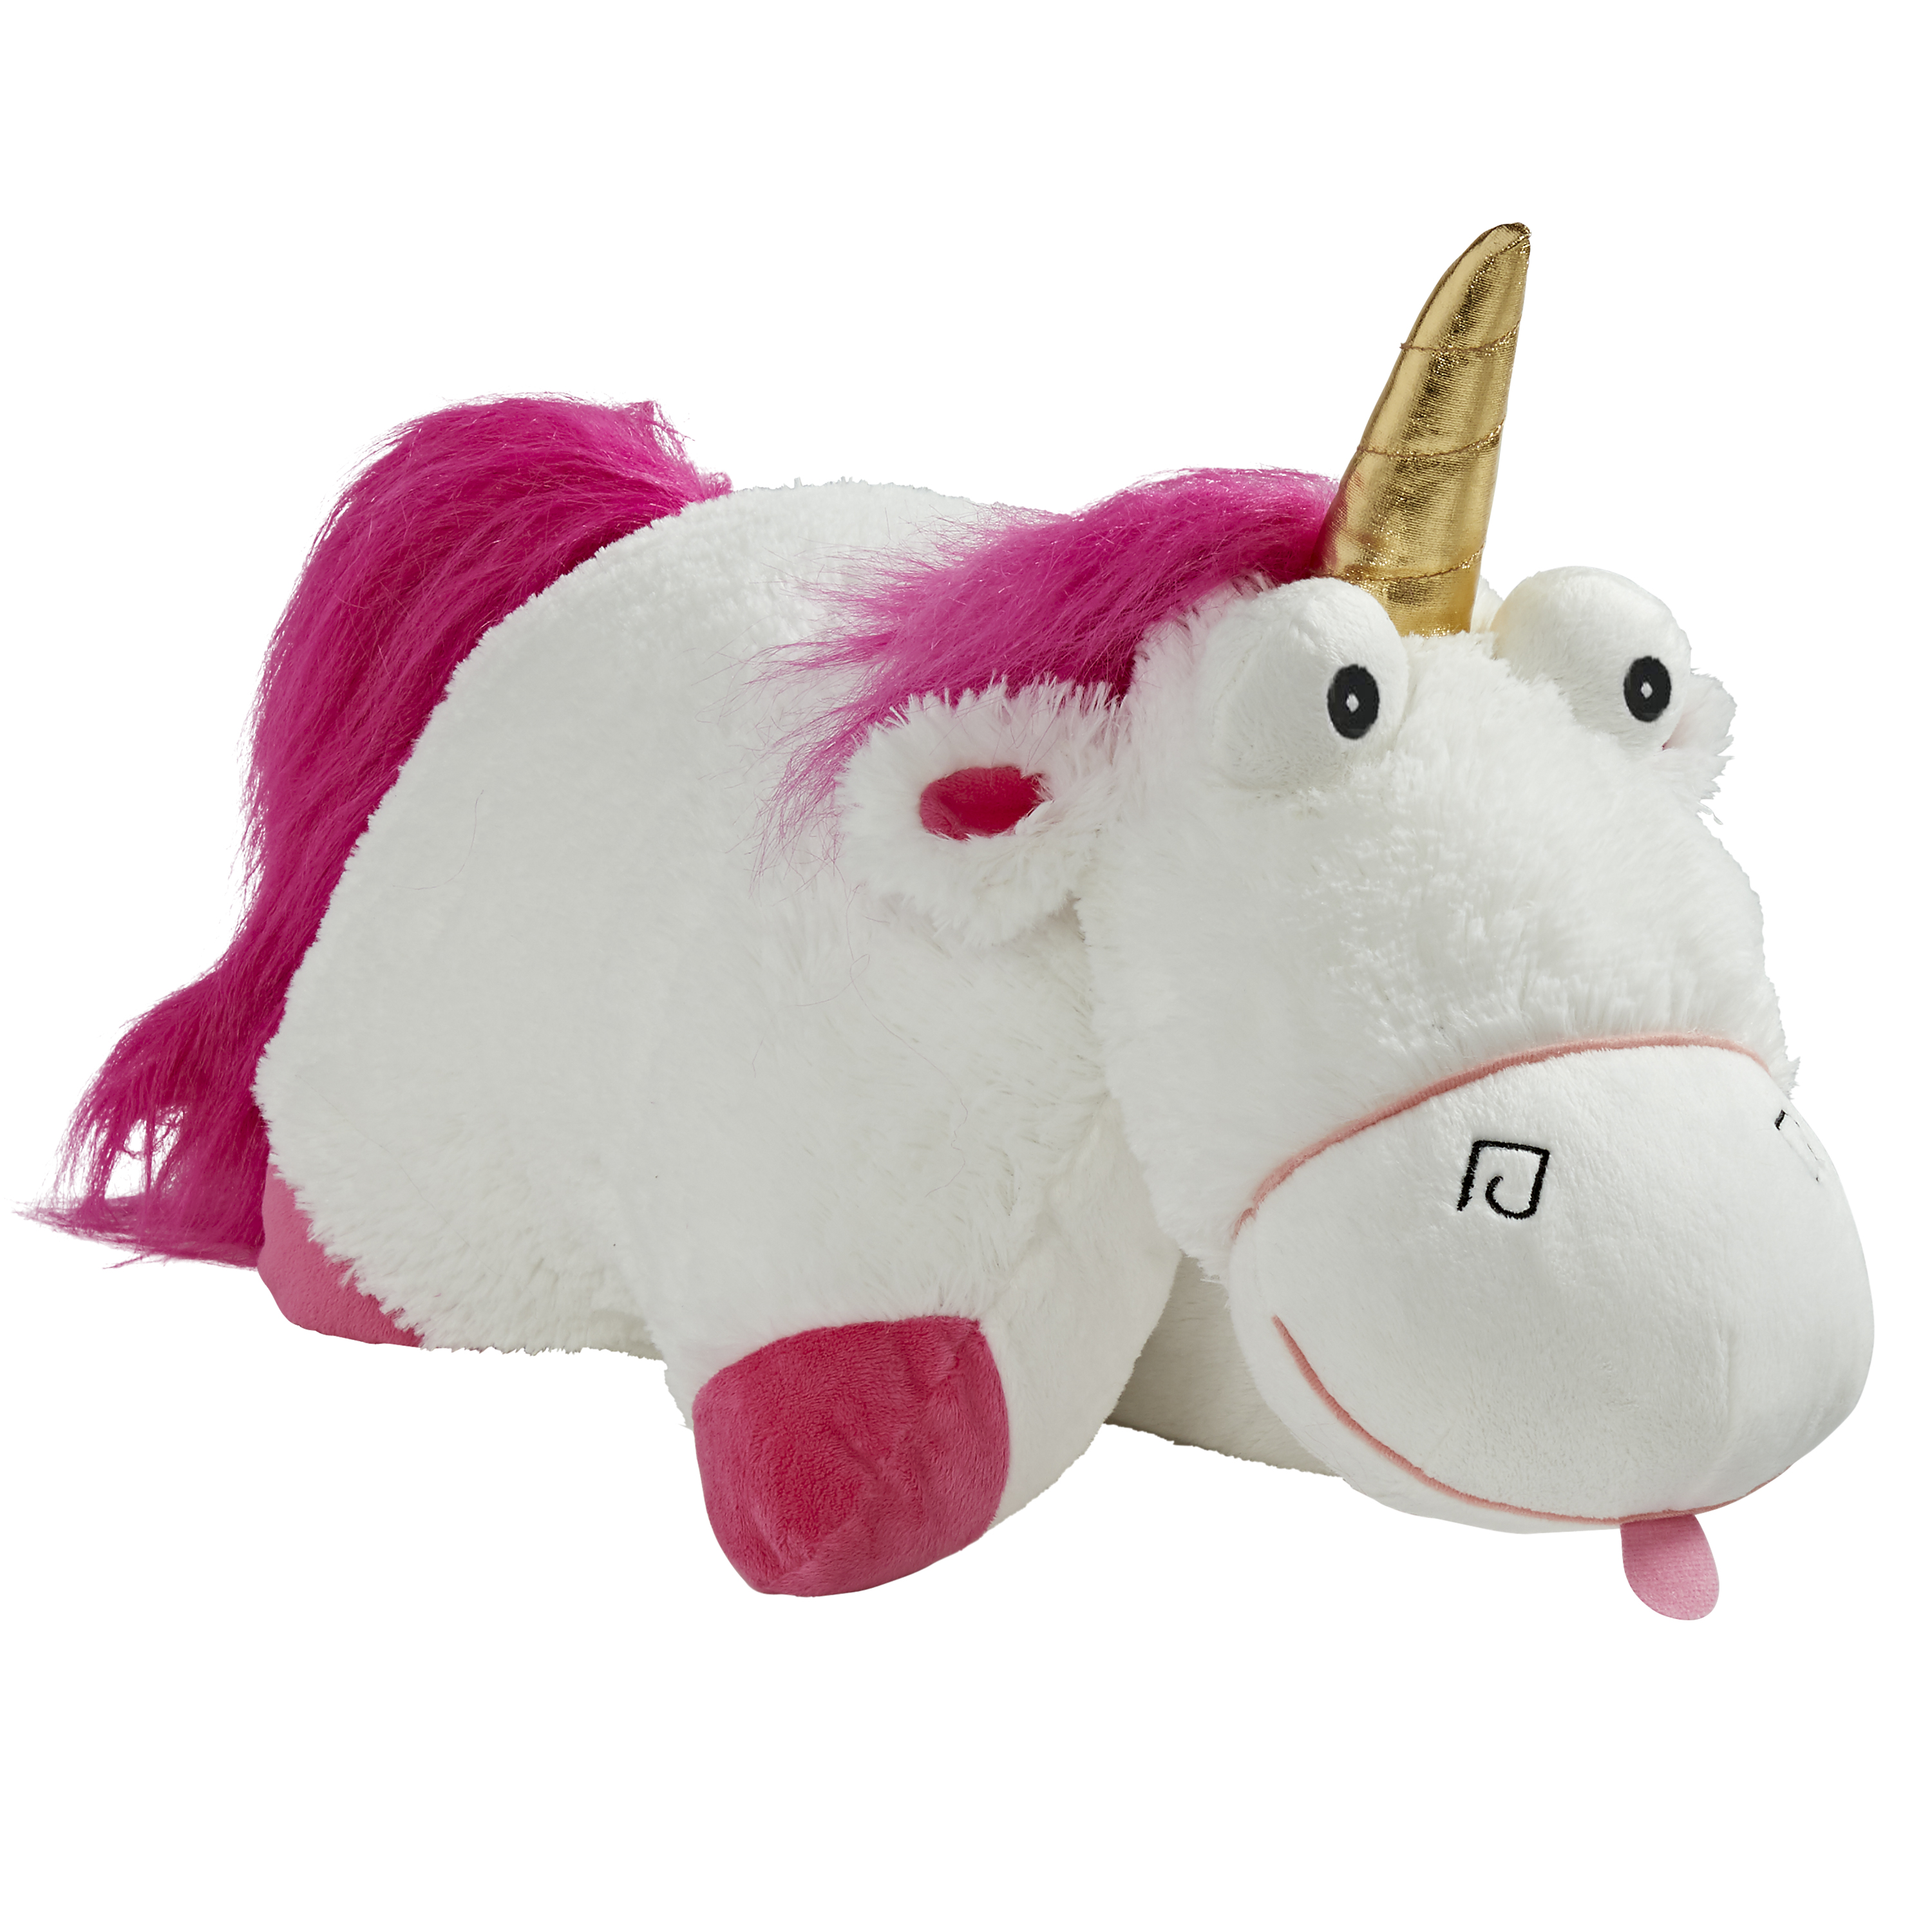 Pillow Pets NBCUniversal Despicable Me Fluffy the Unicorn Stuffed Animal Plush Toy - image 1 of 4